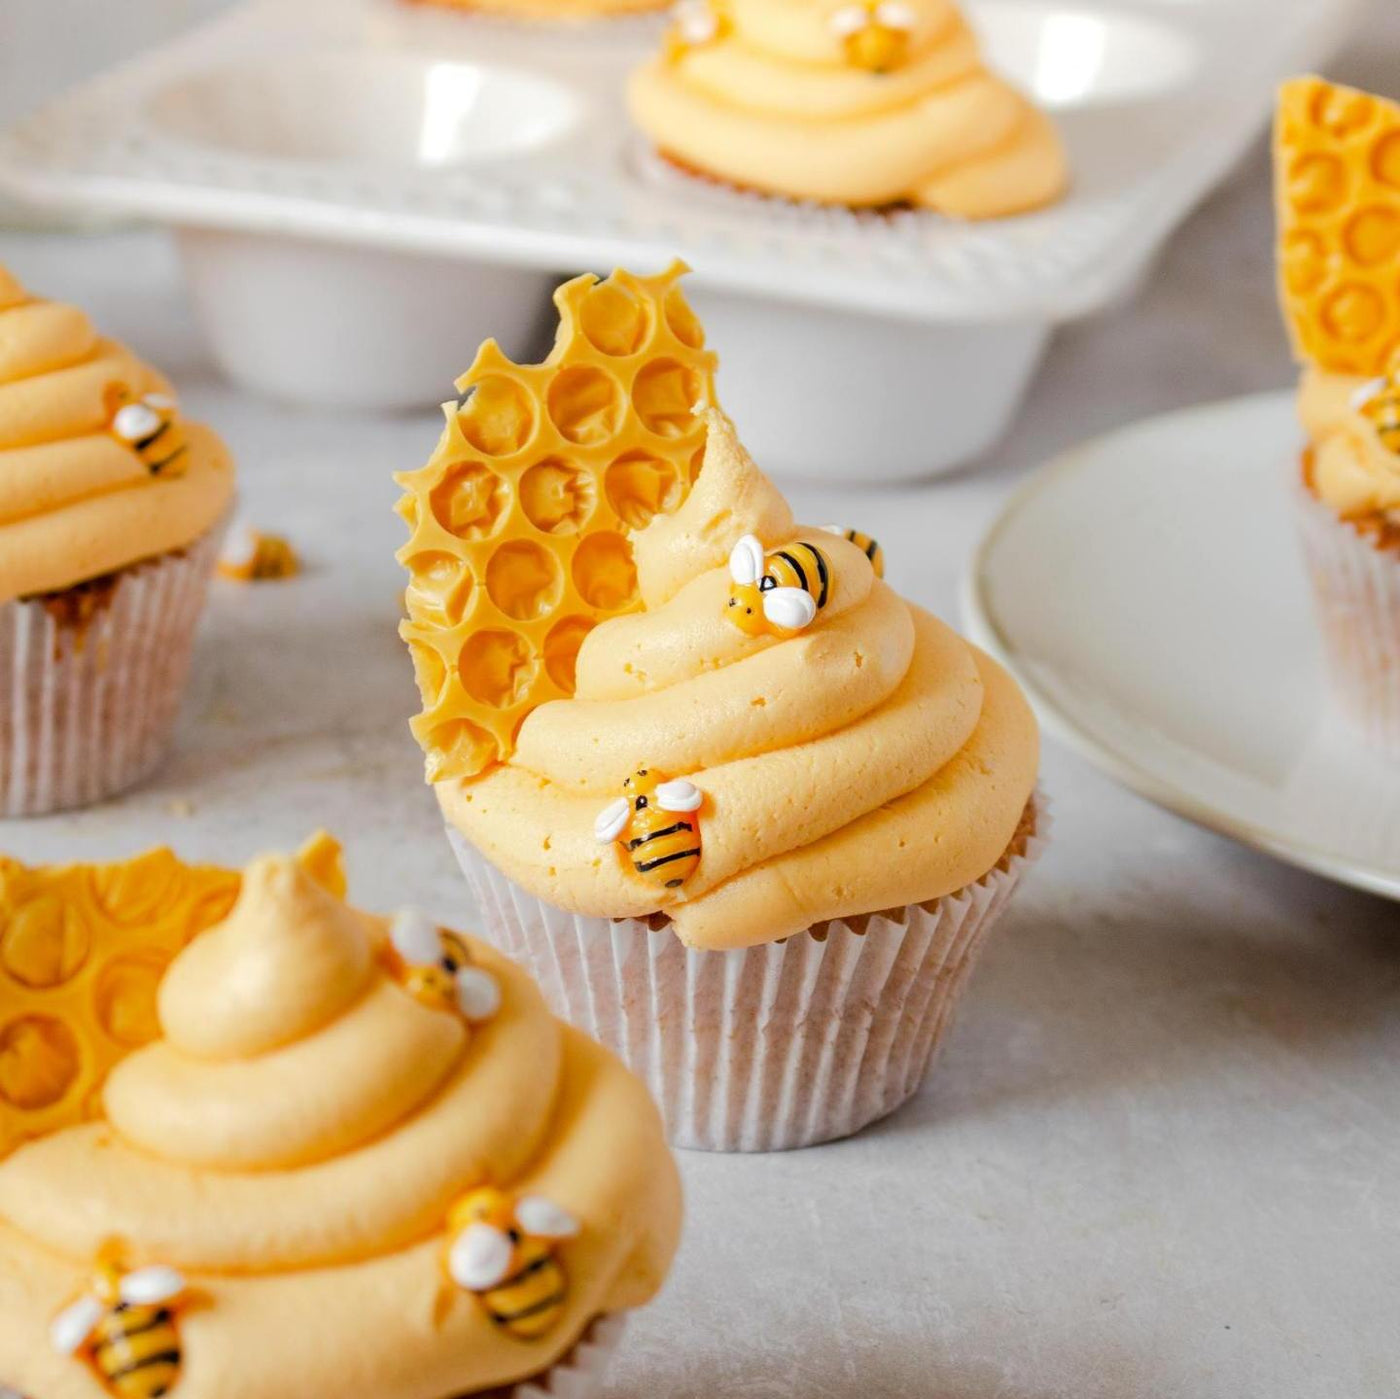 Kids After School Beehive Cupcakes - May 1st